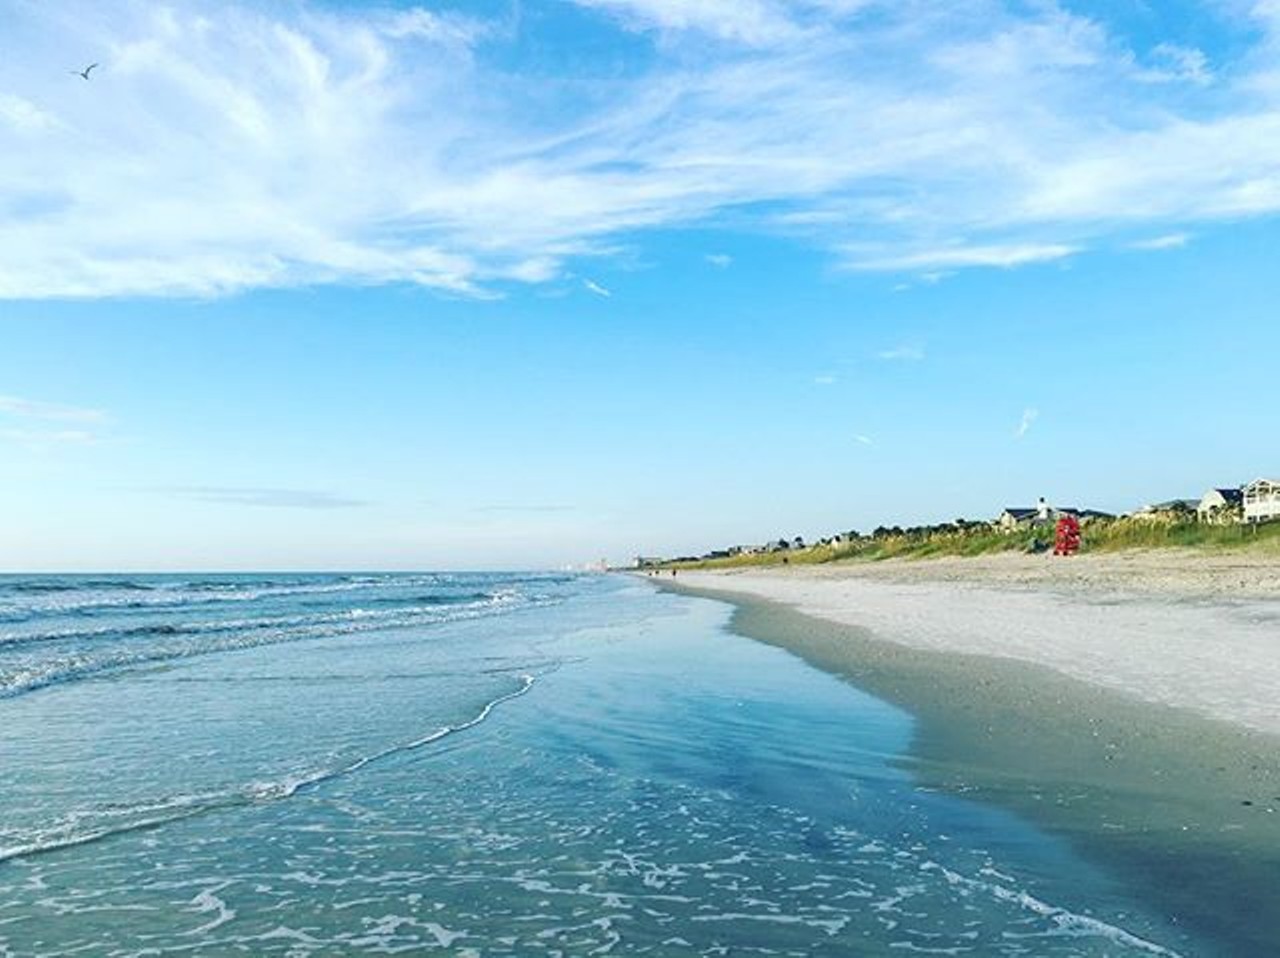  Atlantic Beach 
800 Seminole Road, Atlantic Beach,  Approximately 2 hours 15 minutes
Many people believe Atlantic Beach was the site of the first year-round Native American Settlement in North America, but today it claims miles of beaches with some great surfing. And when you need a little city life, you can head into Jacksonville.
Photo via jamestnorth/Instagram